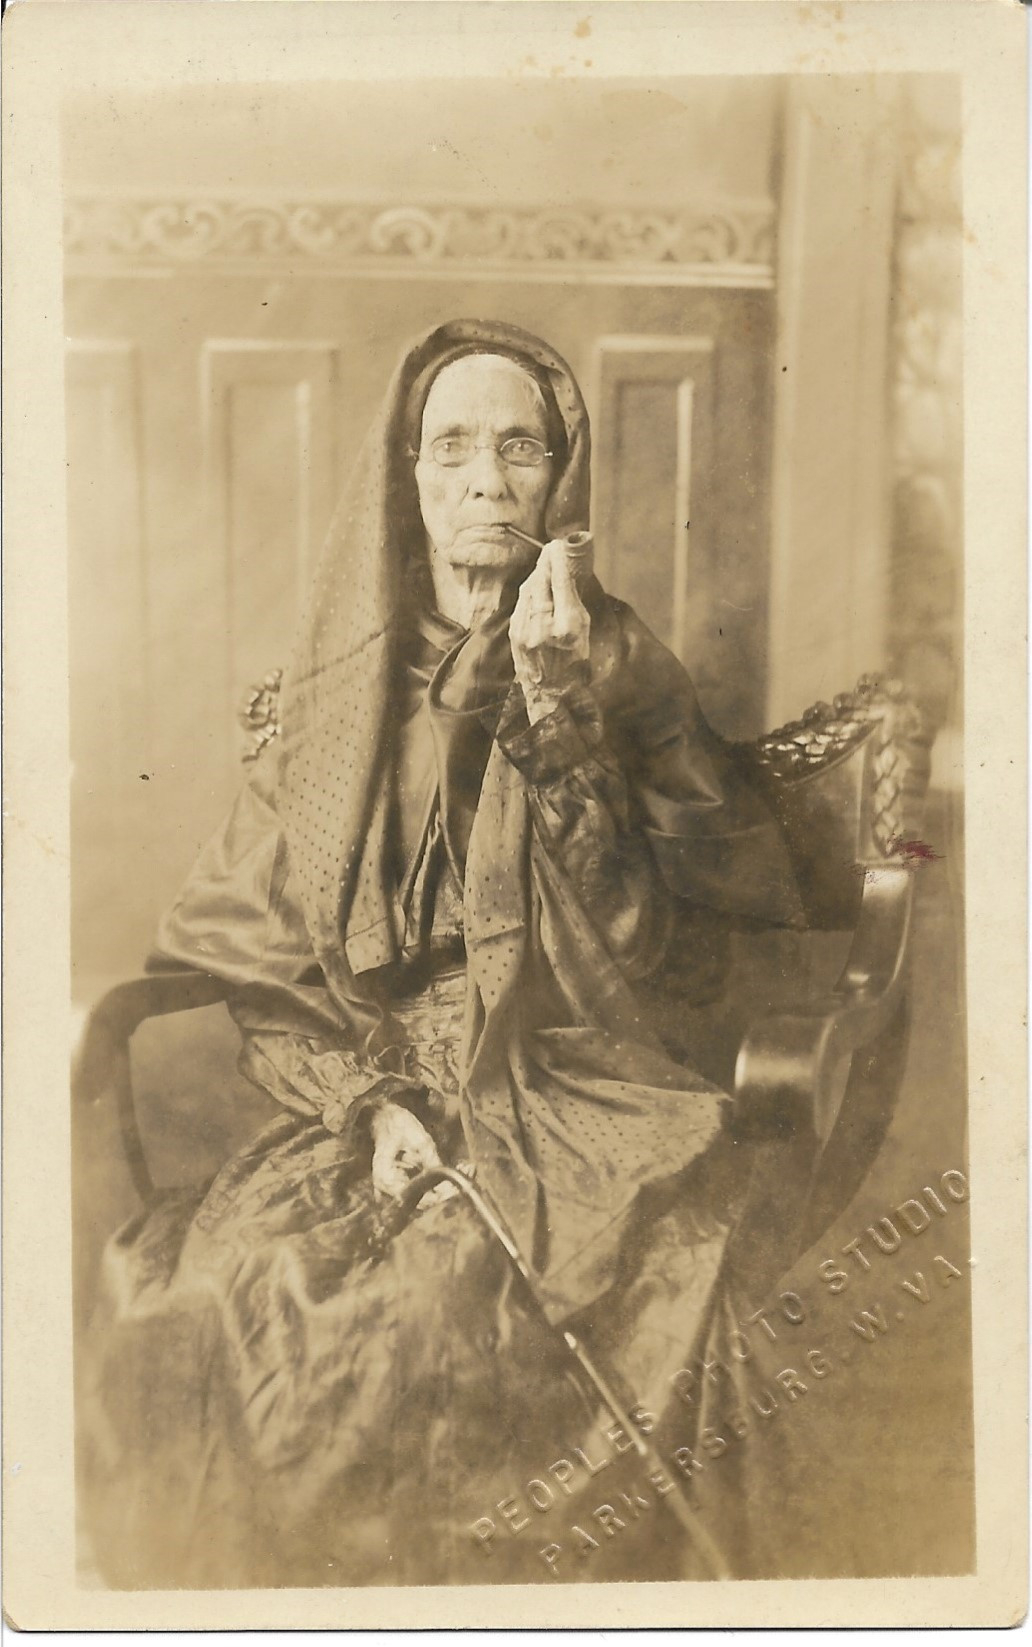 "Old woman smoking a pipe"